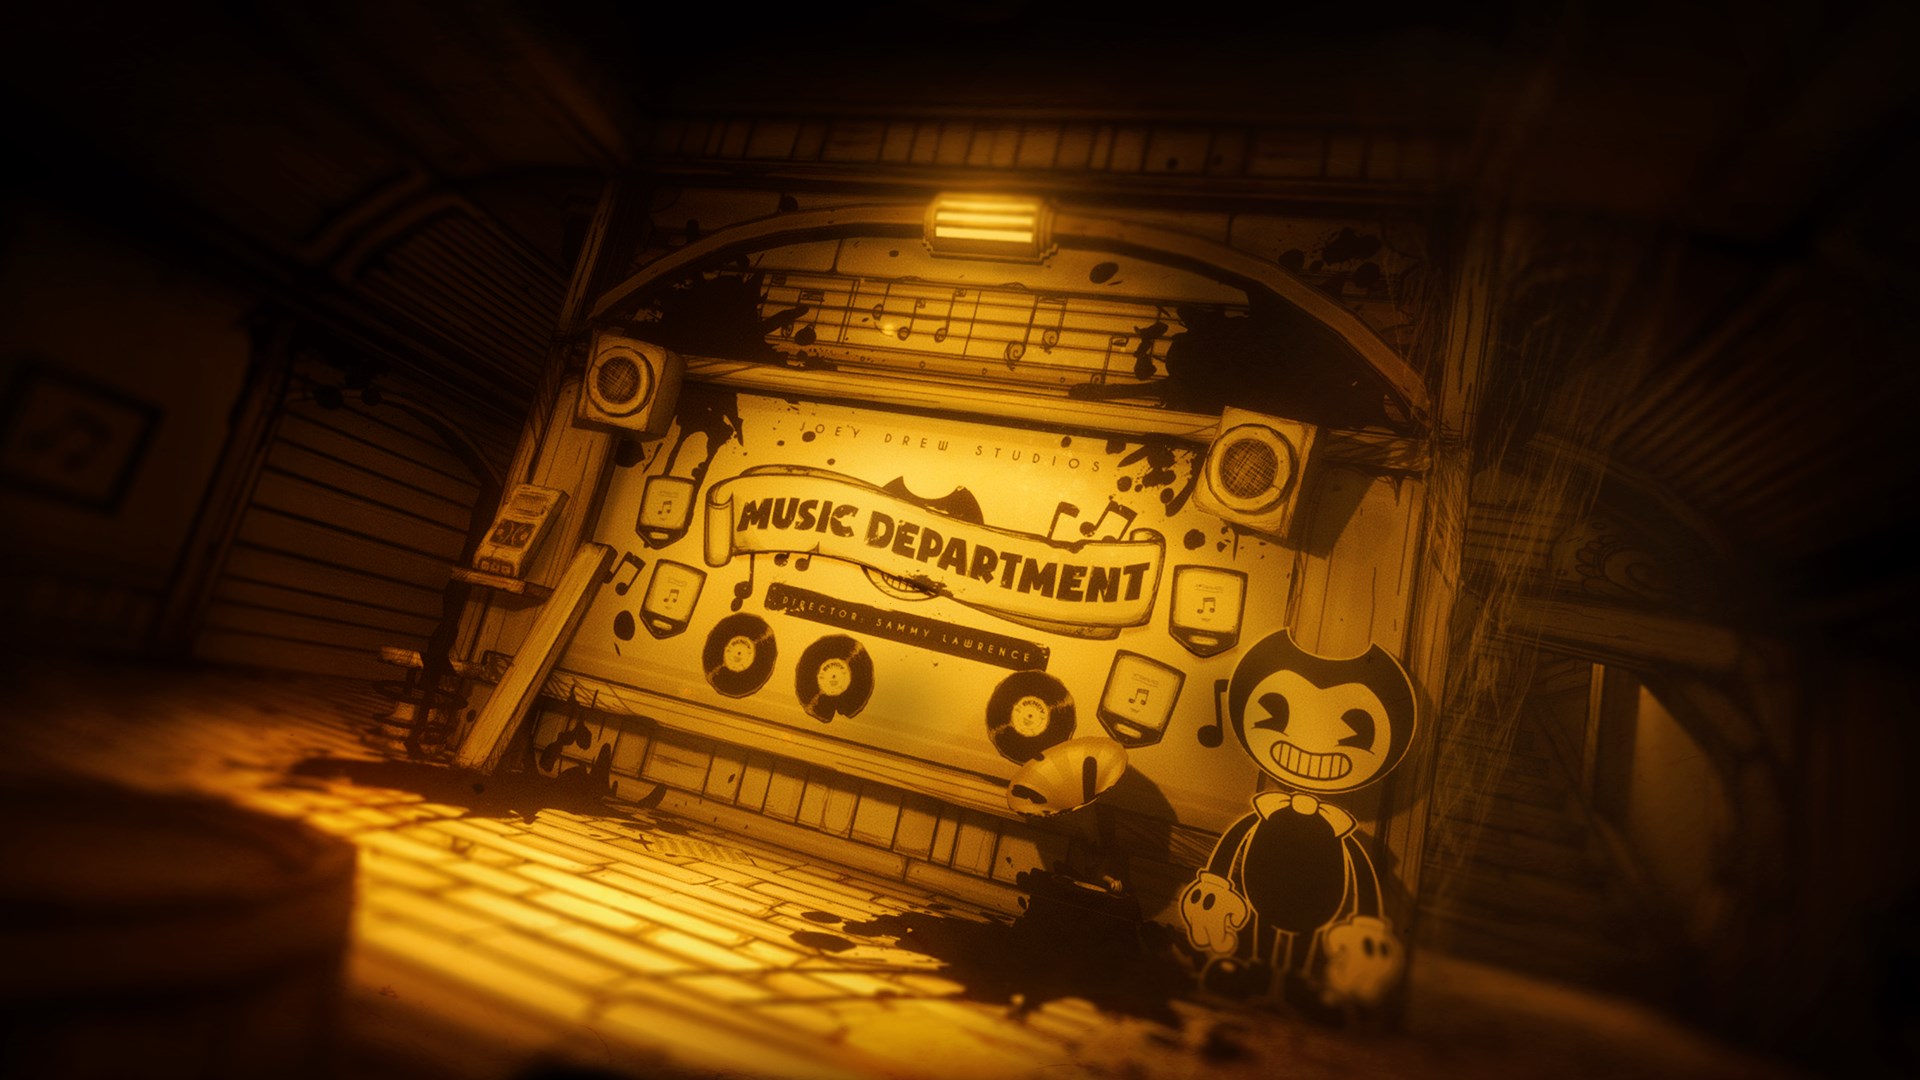 bendy and the ink machine xbox store